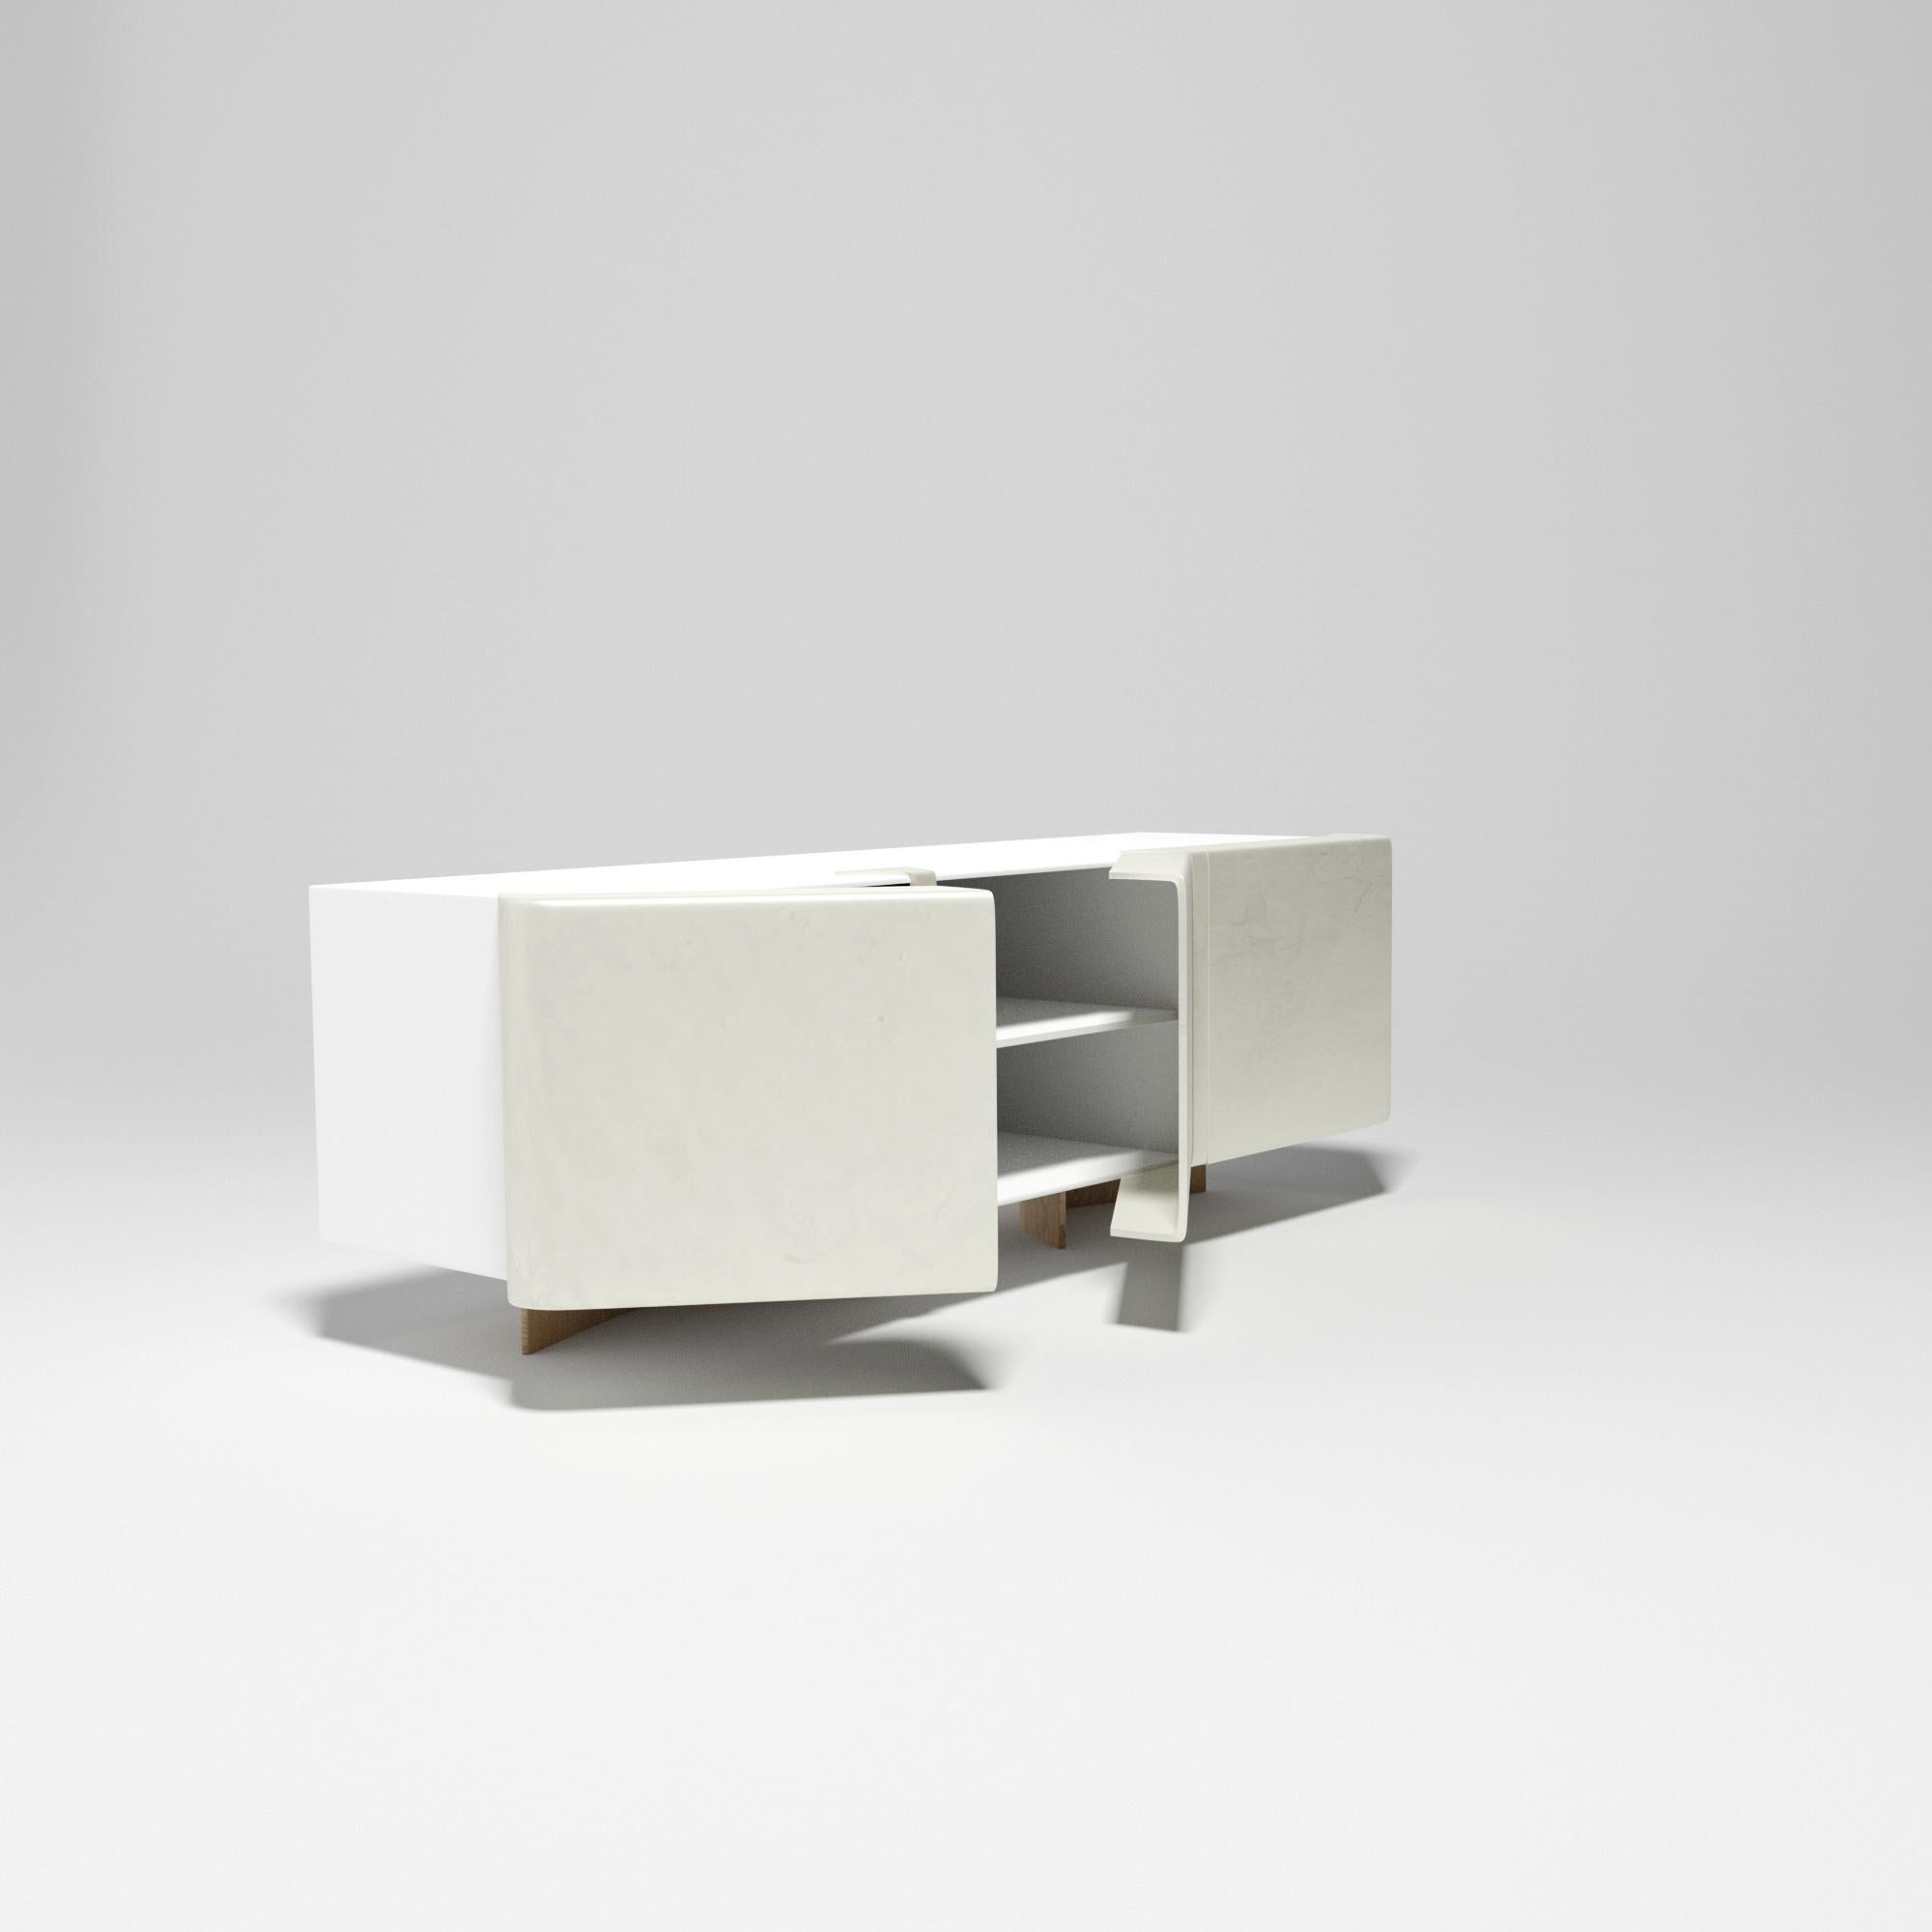 French Linden, Lime Powder Coated 21st Century Design Sideboard by Studio SORS